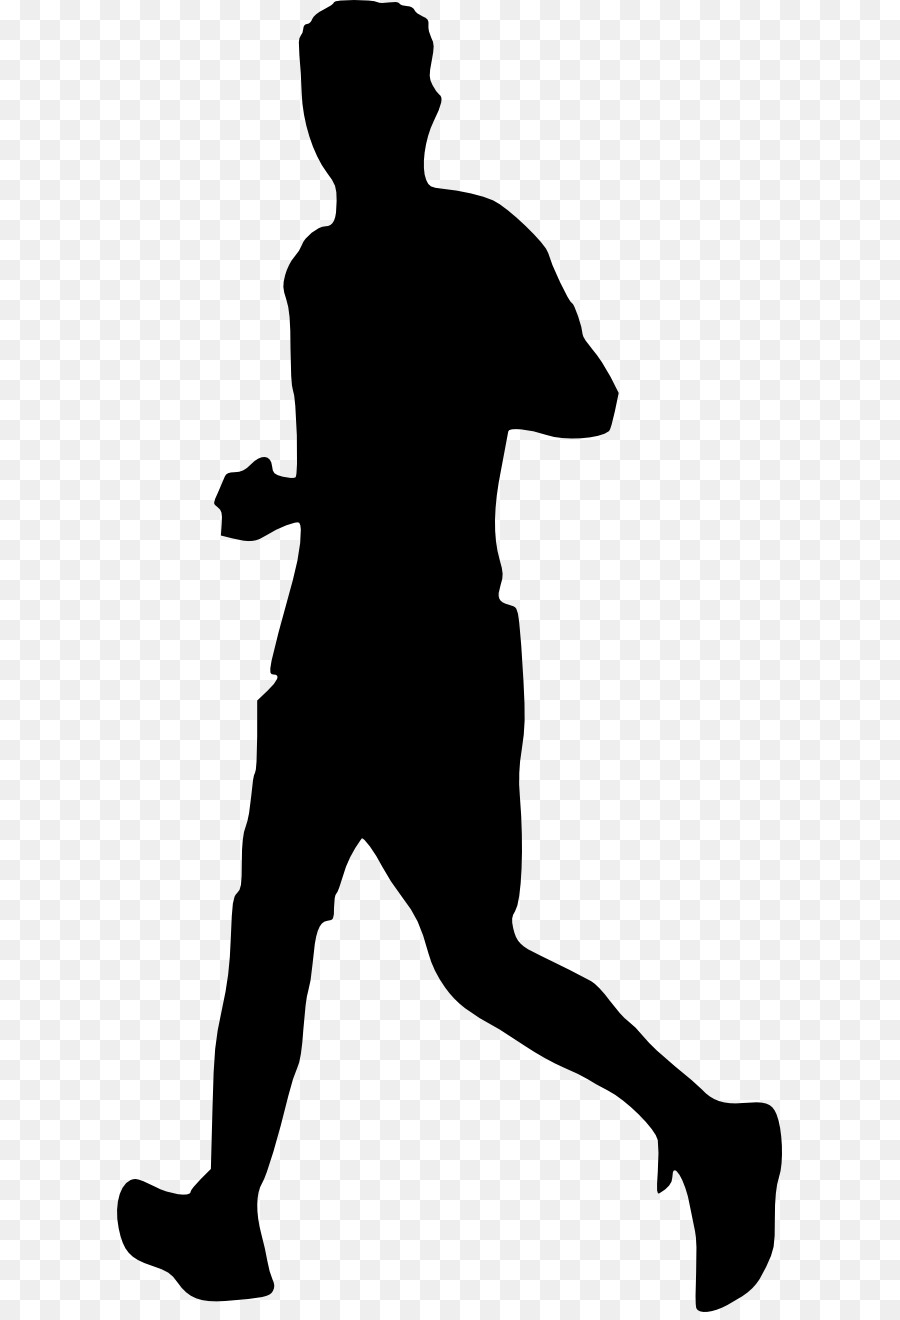 Silhouette Running Competition Clip art - running man png download - 665*1312 - Free Transparent Silhouette png Download.